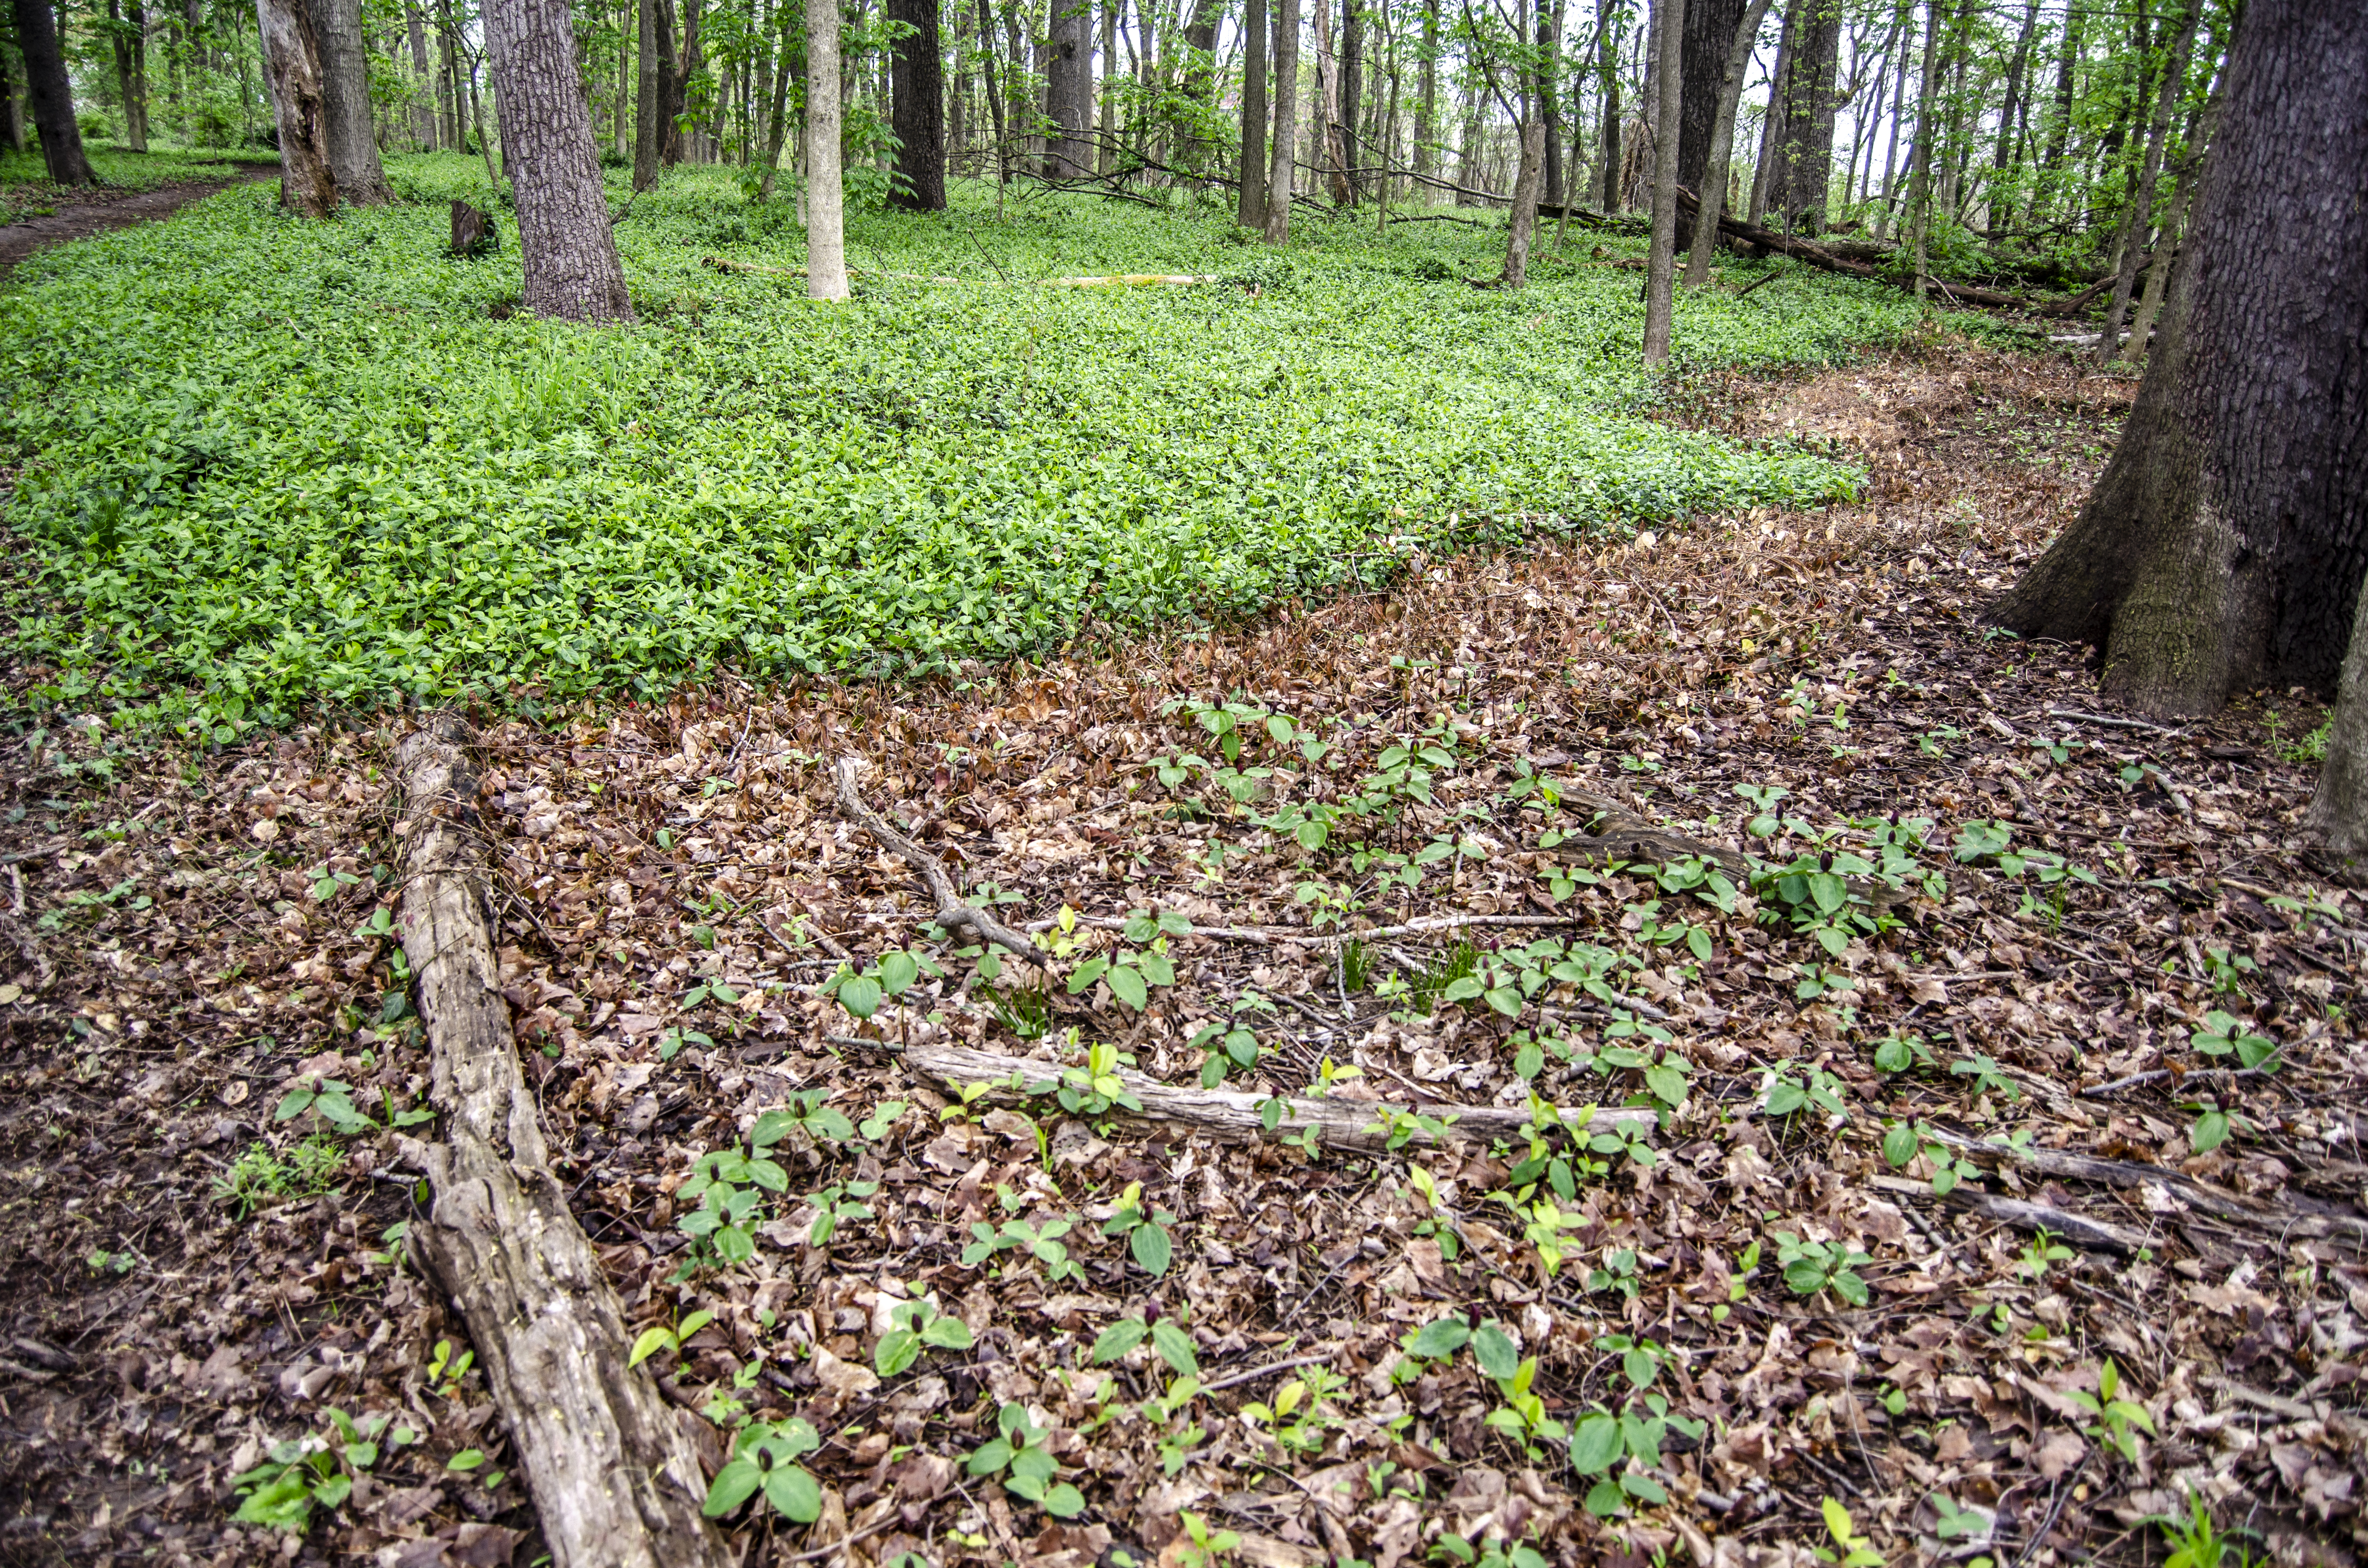 Invasive wintercreeper (top) blankets much of The Arboretum Woods. Trilliums, (bottom) a native spring wildflower, are able to reestablish in a spot where wintercreeper has been eradicated. Photo by Carol Lea Spence